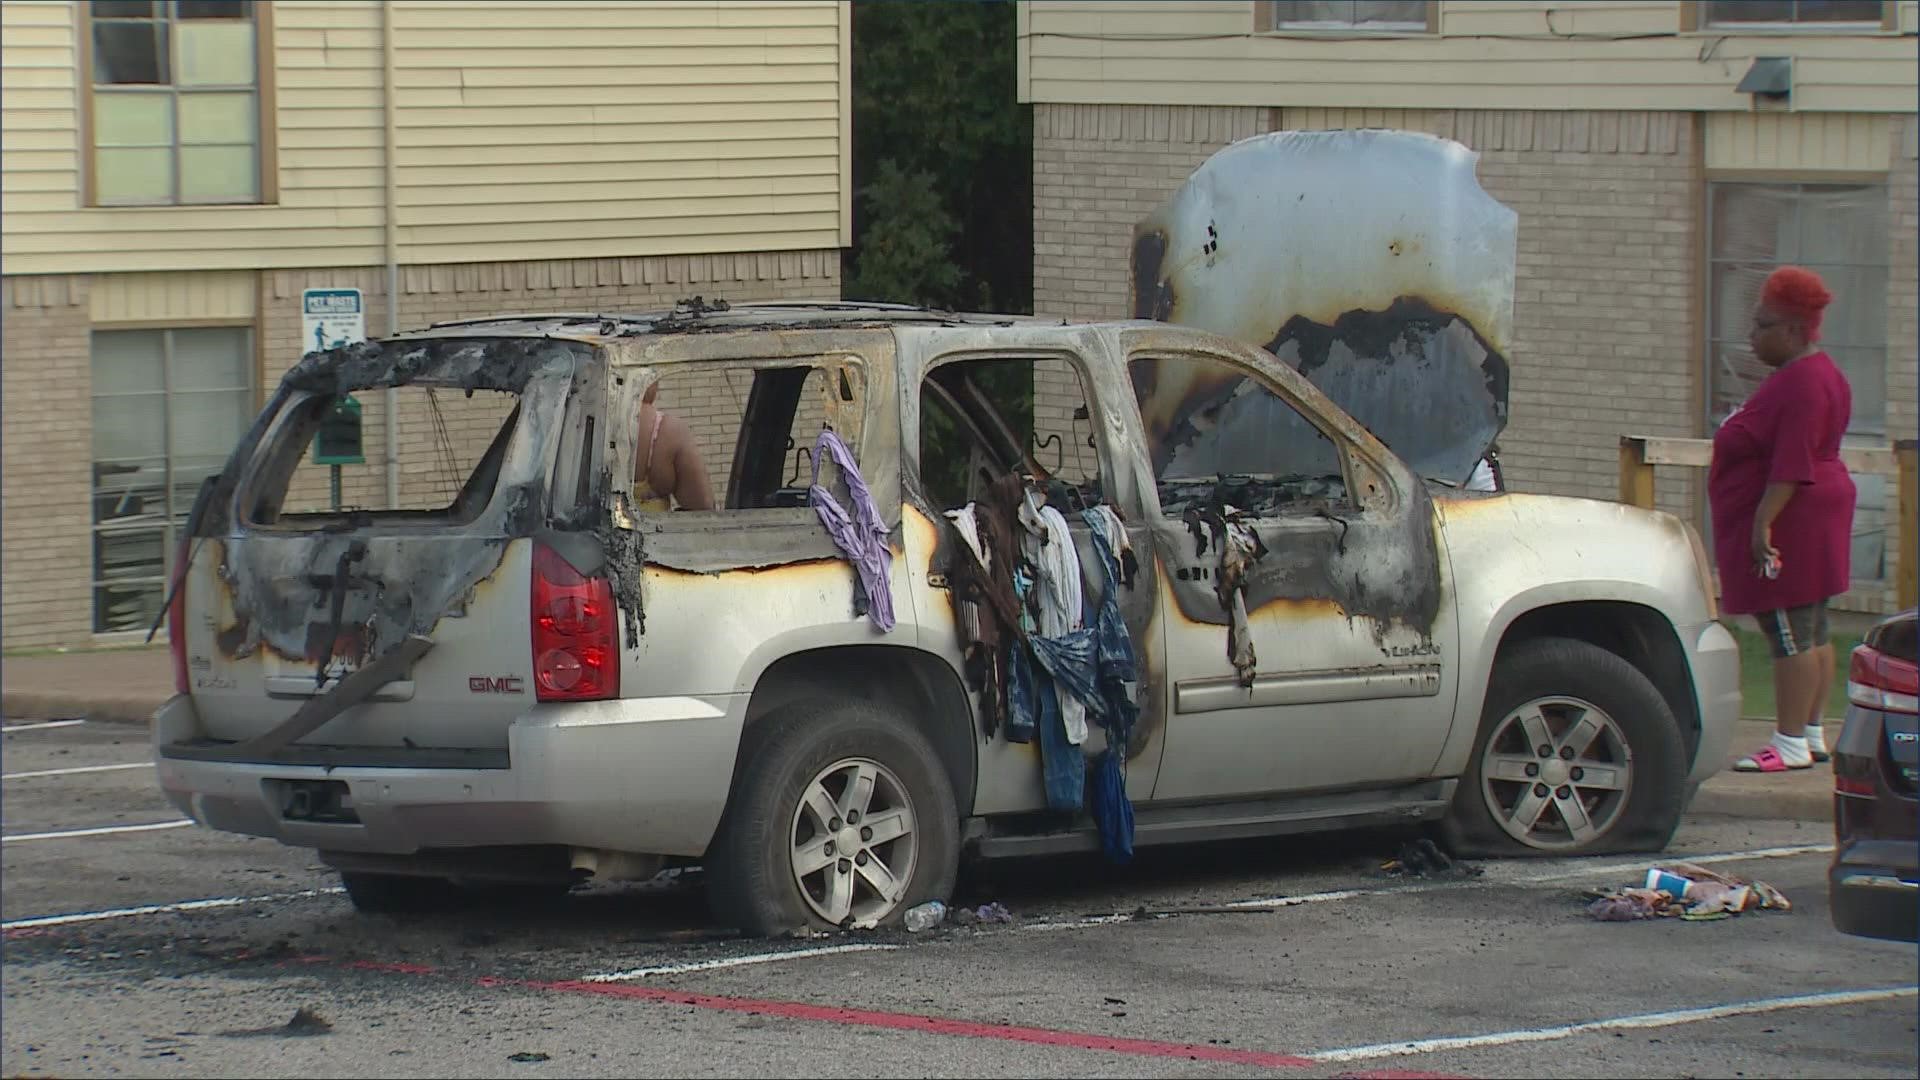 "This is crazy," said Roshunda Tilly, who found her SUV burned. Tilley said a neighbor called her while she was at work and she rushed home to see the damage.